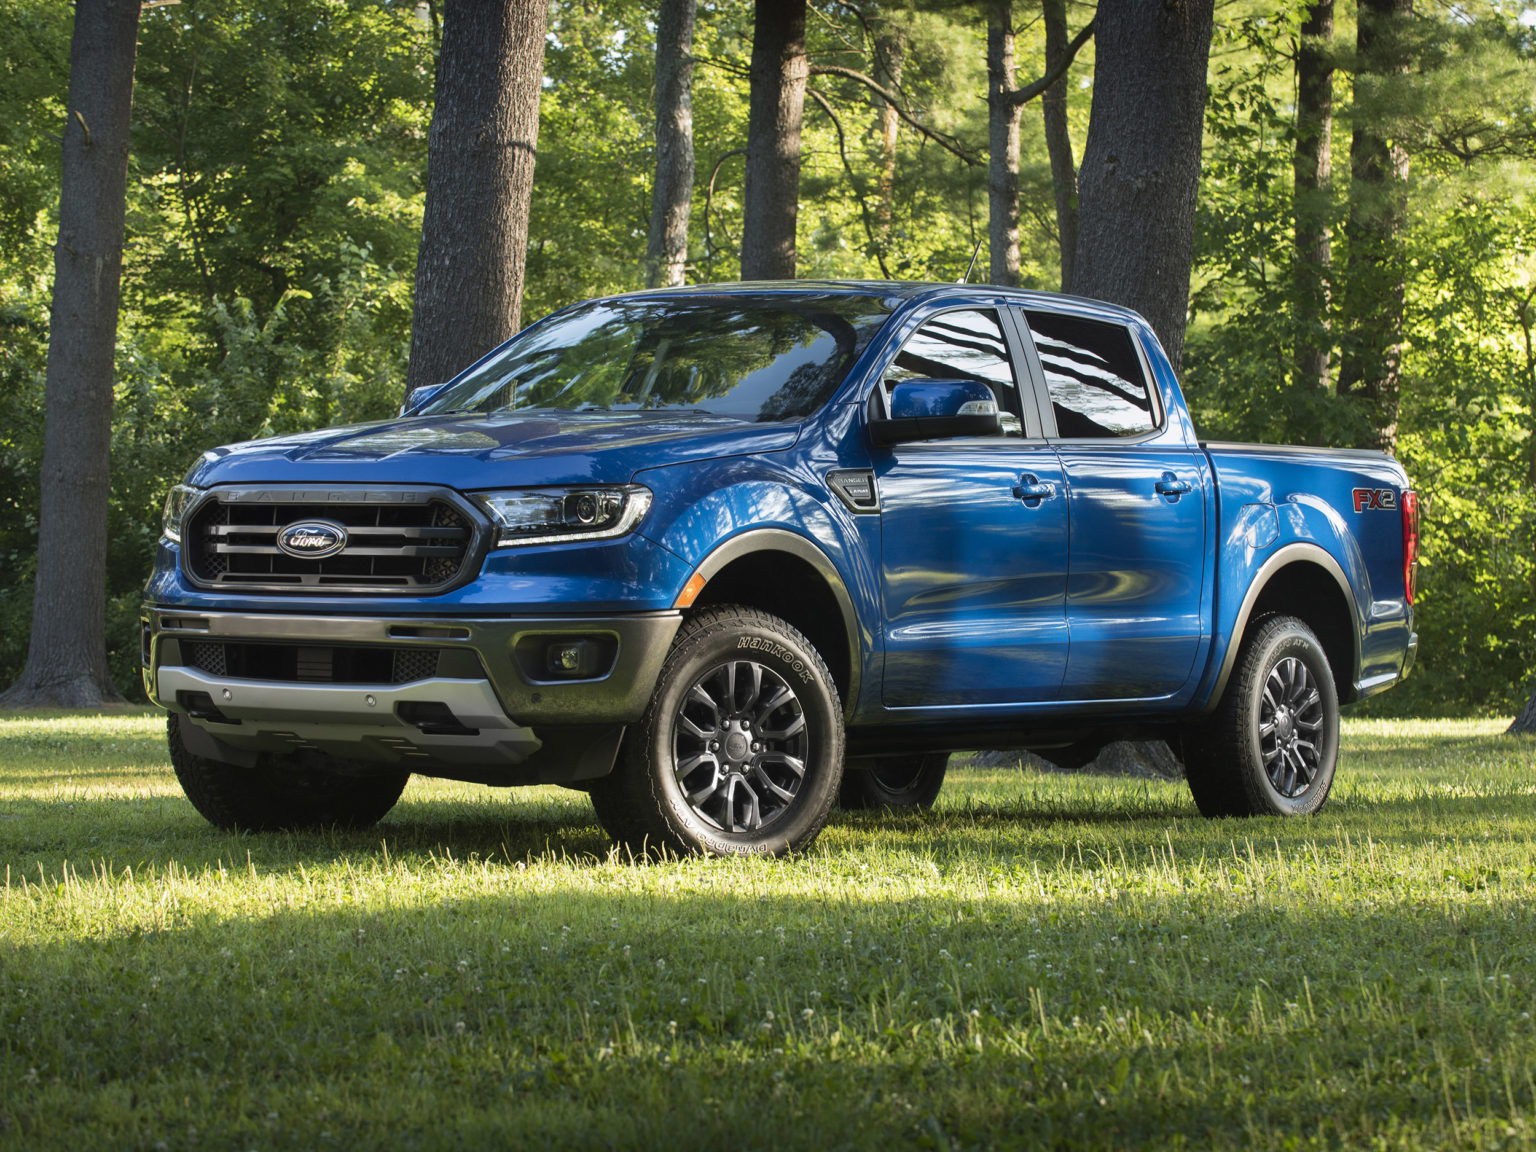 The Ford Ranger is a solid entry into the midsize truck segment